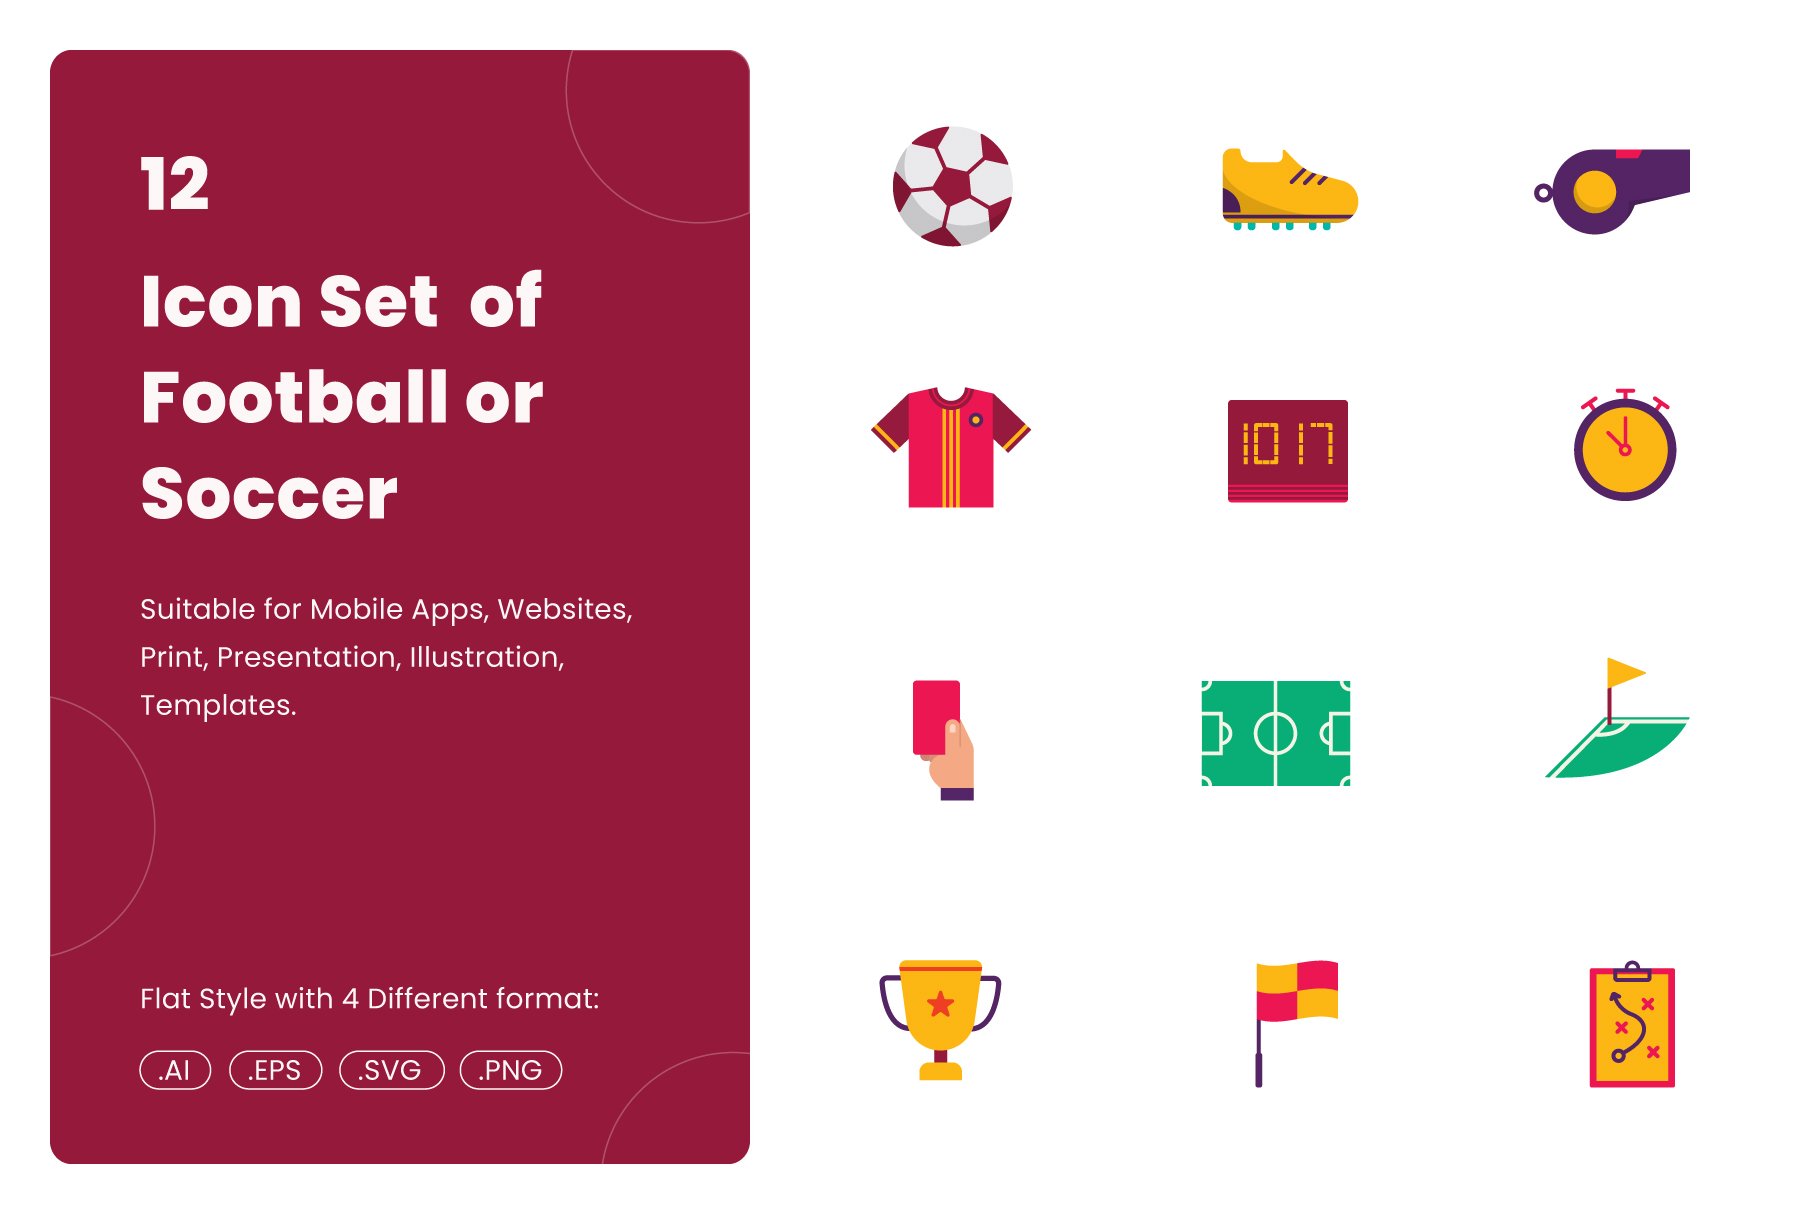 12 Most Common Football Color Icons cover image.